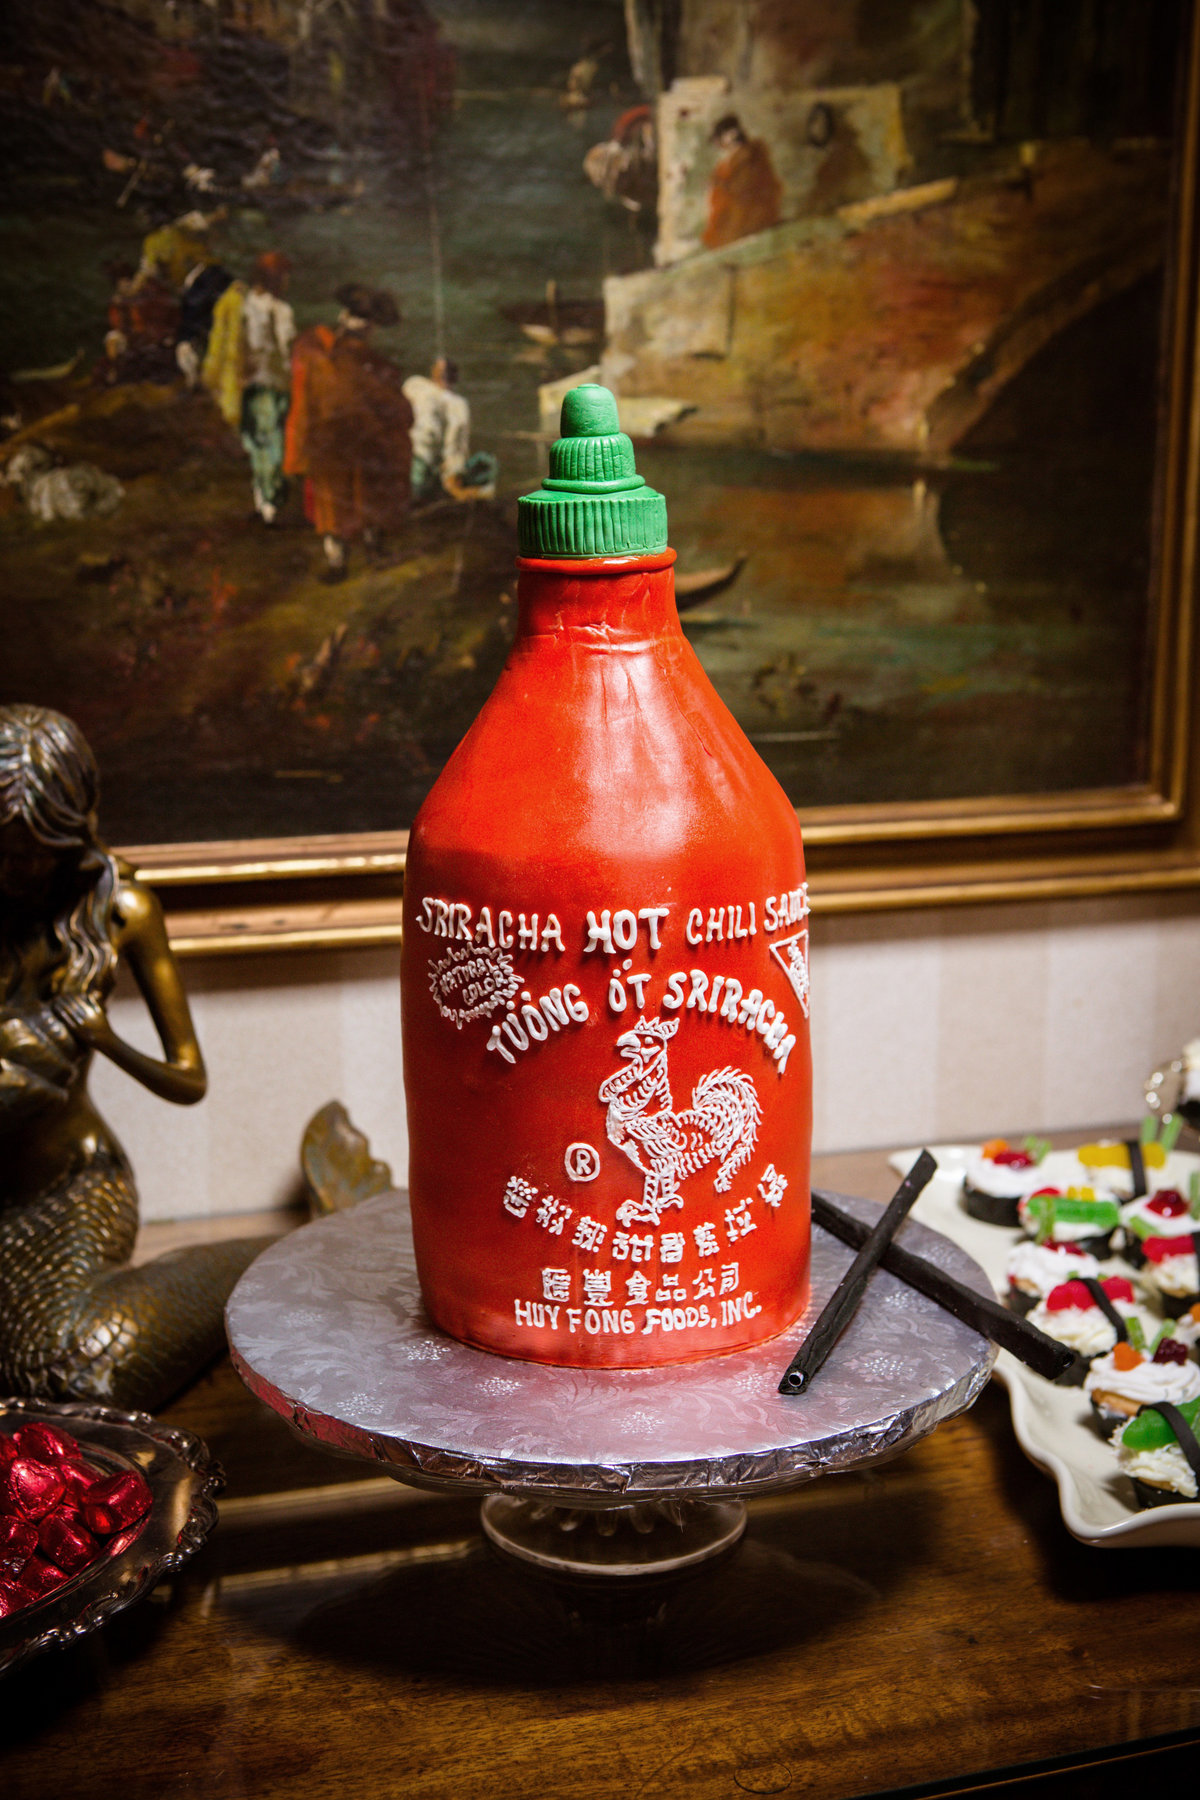 A Sriracha bottle grooms cake at the wedding reception in Mobile, Alabama.